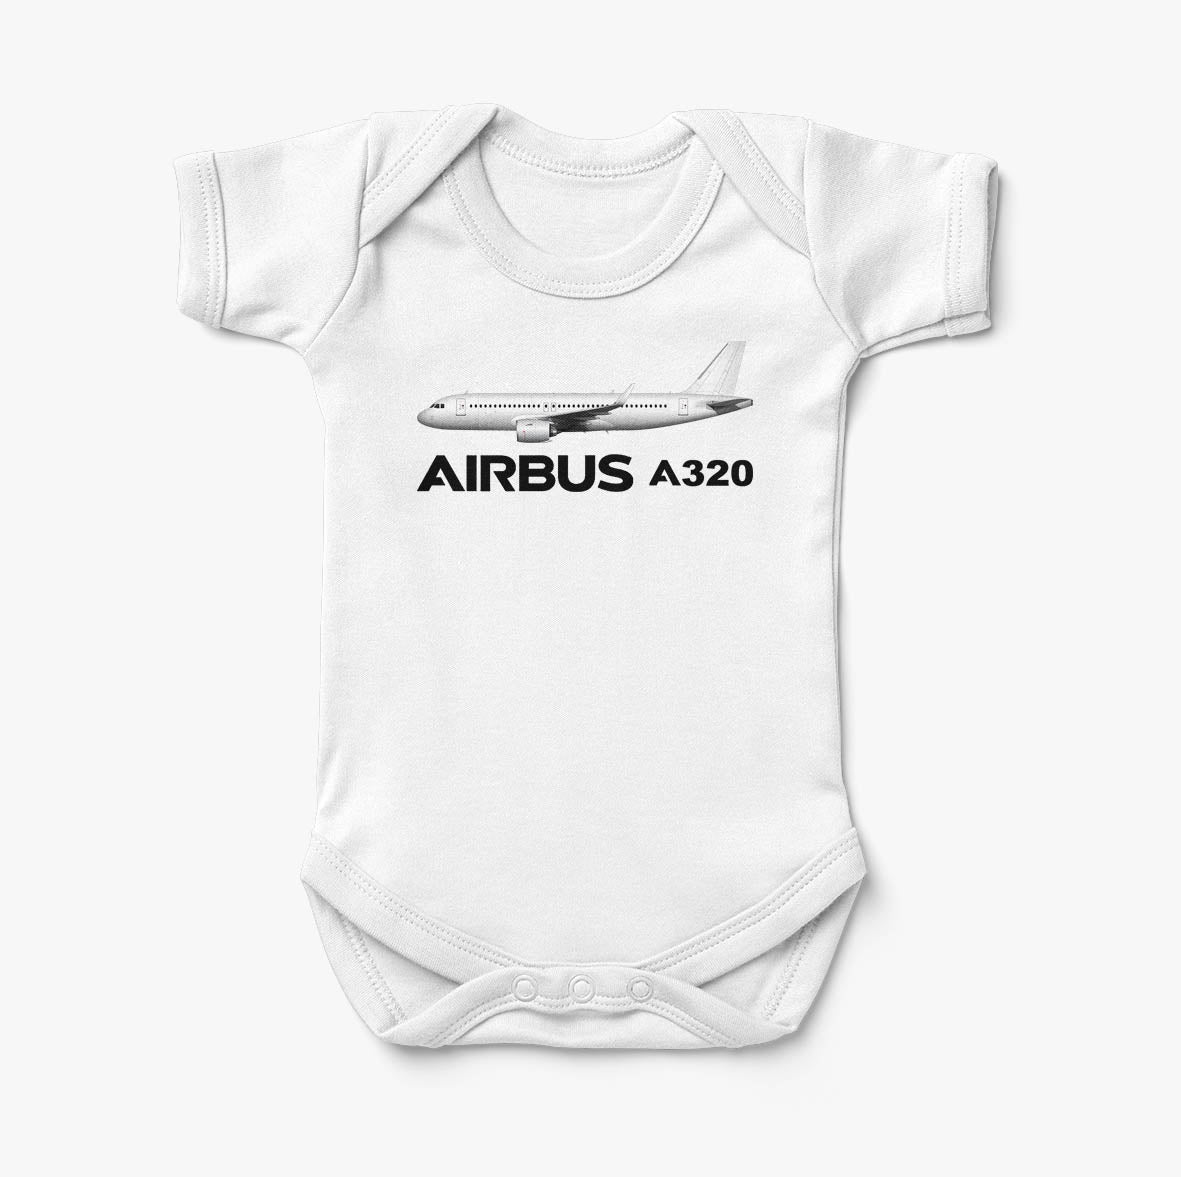 The Airbus A320 Designed Baby Bodysuits